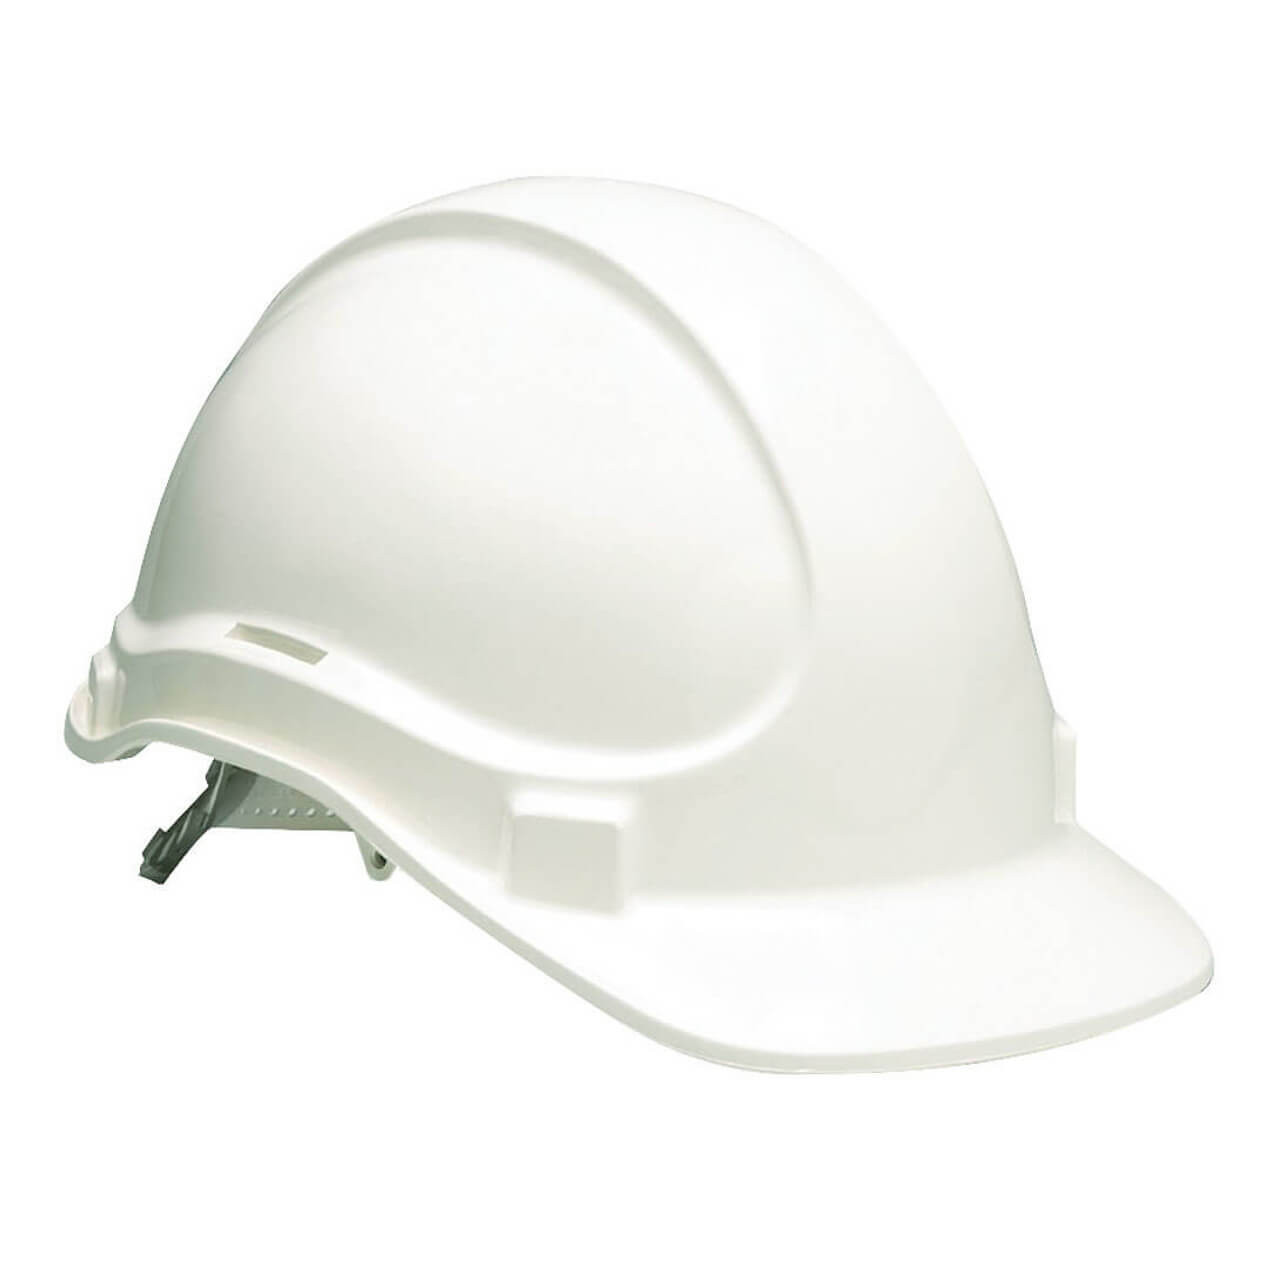 3M TA560 Type 1 ABS Unvented Safety Hard Hat White